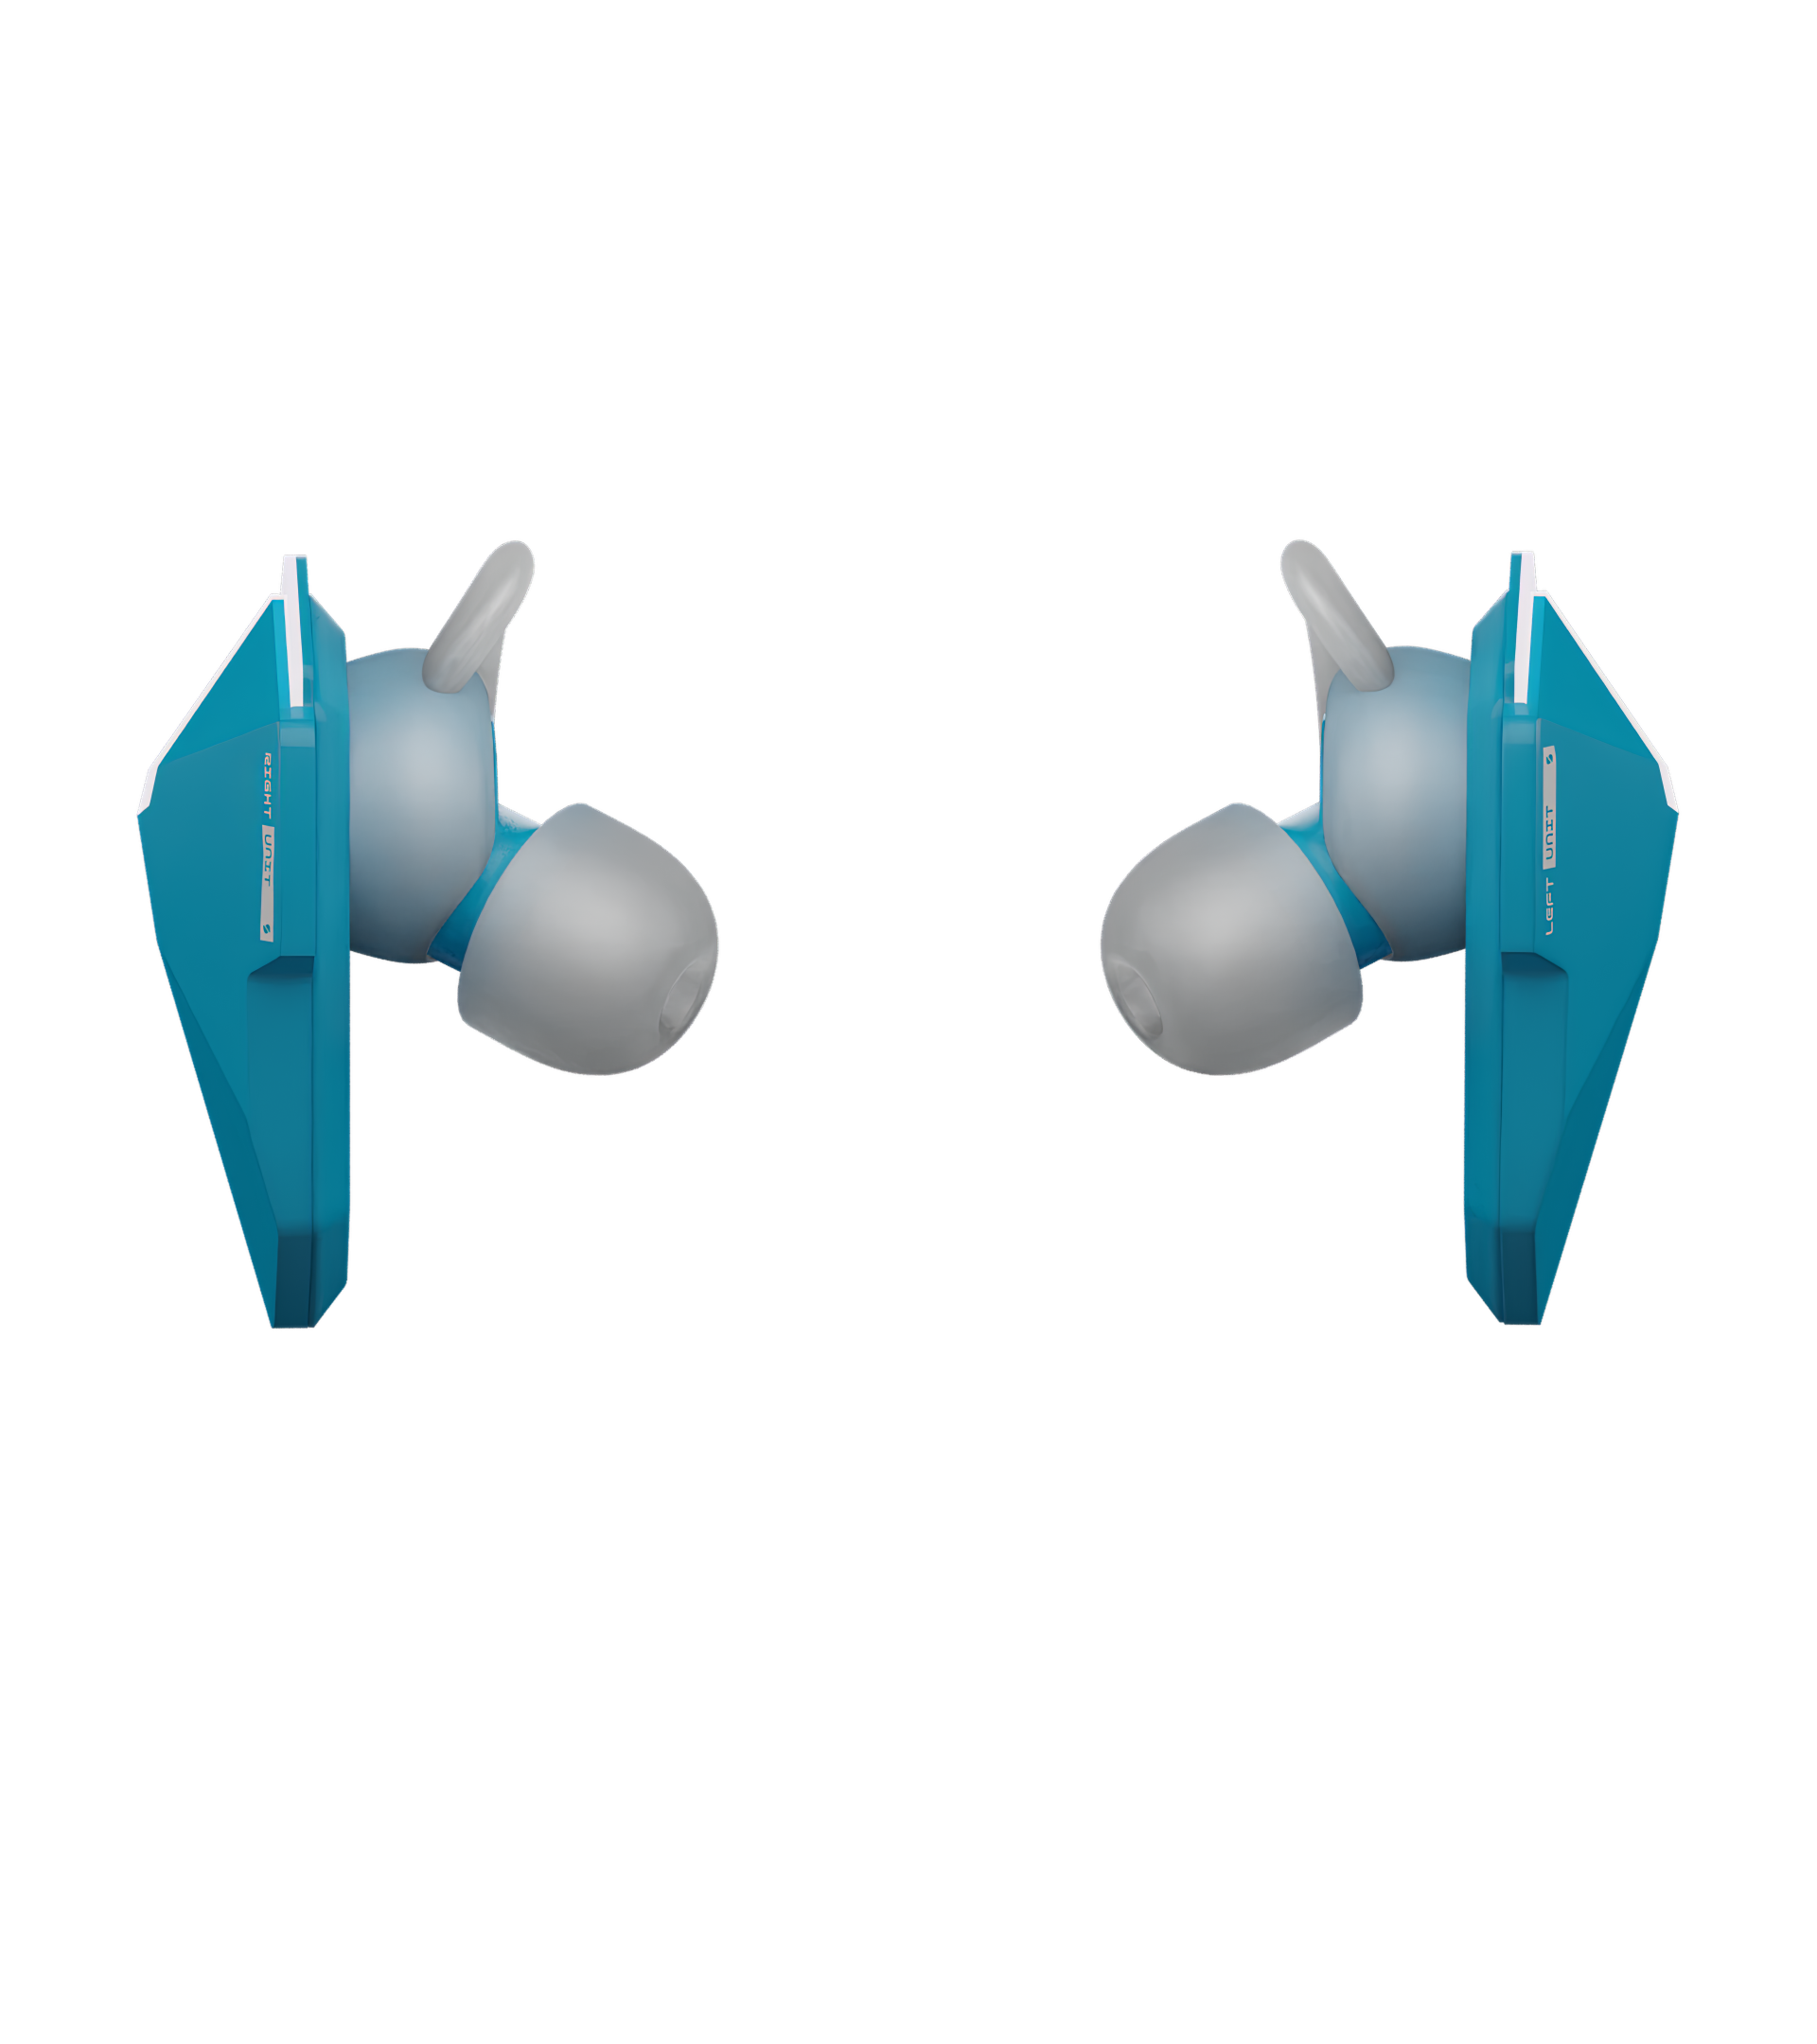 SANWEAR™ UMI in-ear Bluetooth earbuds top view